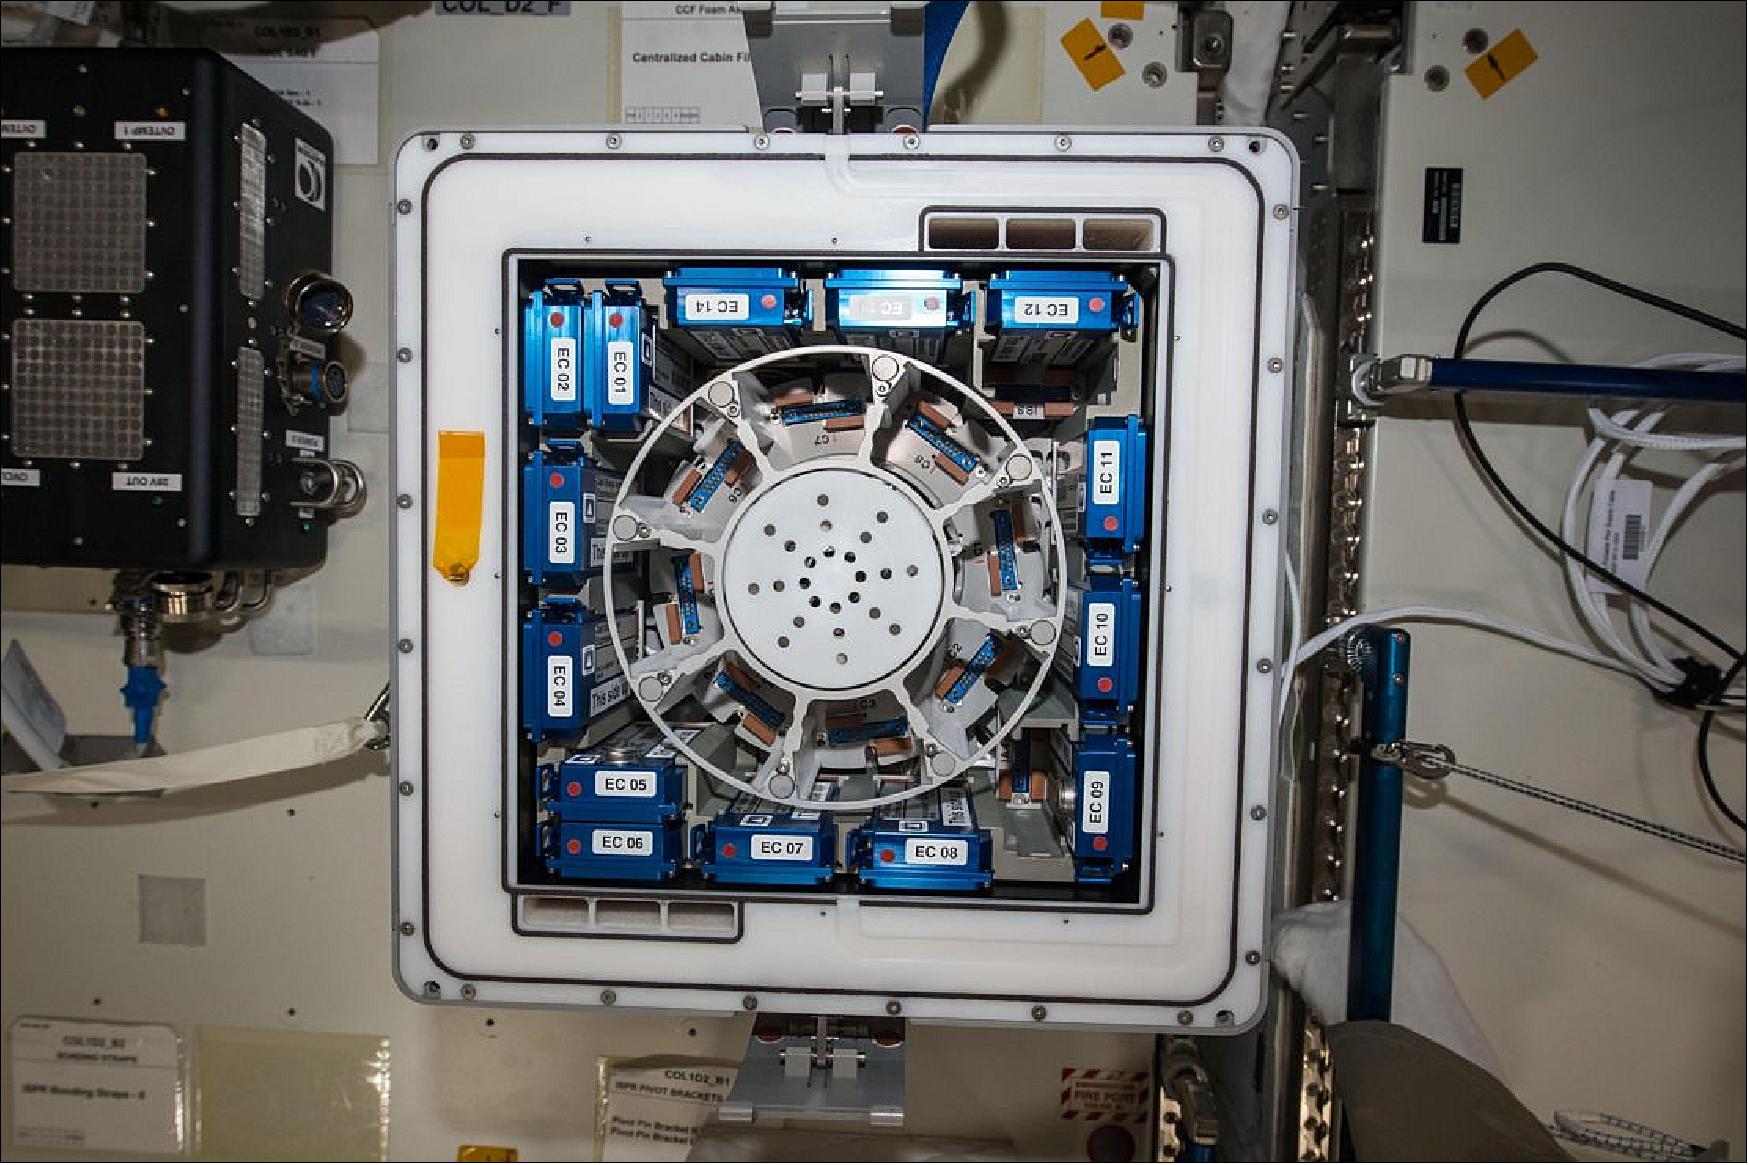 Figure 117: Kubik on Space Station: A miniaturized laboratory inside the orbital laboratory that is ESA’s Columbus module, this 40 cm cube has been one of its quiet scientific triumphs. Kubik – from the Russian for cube – has been working aboard the International Space Station since before Columbus’ arrival in February 2008 (image credit: NASA)